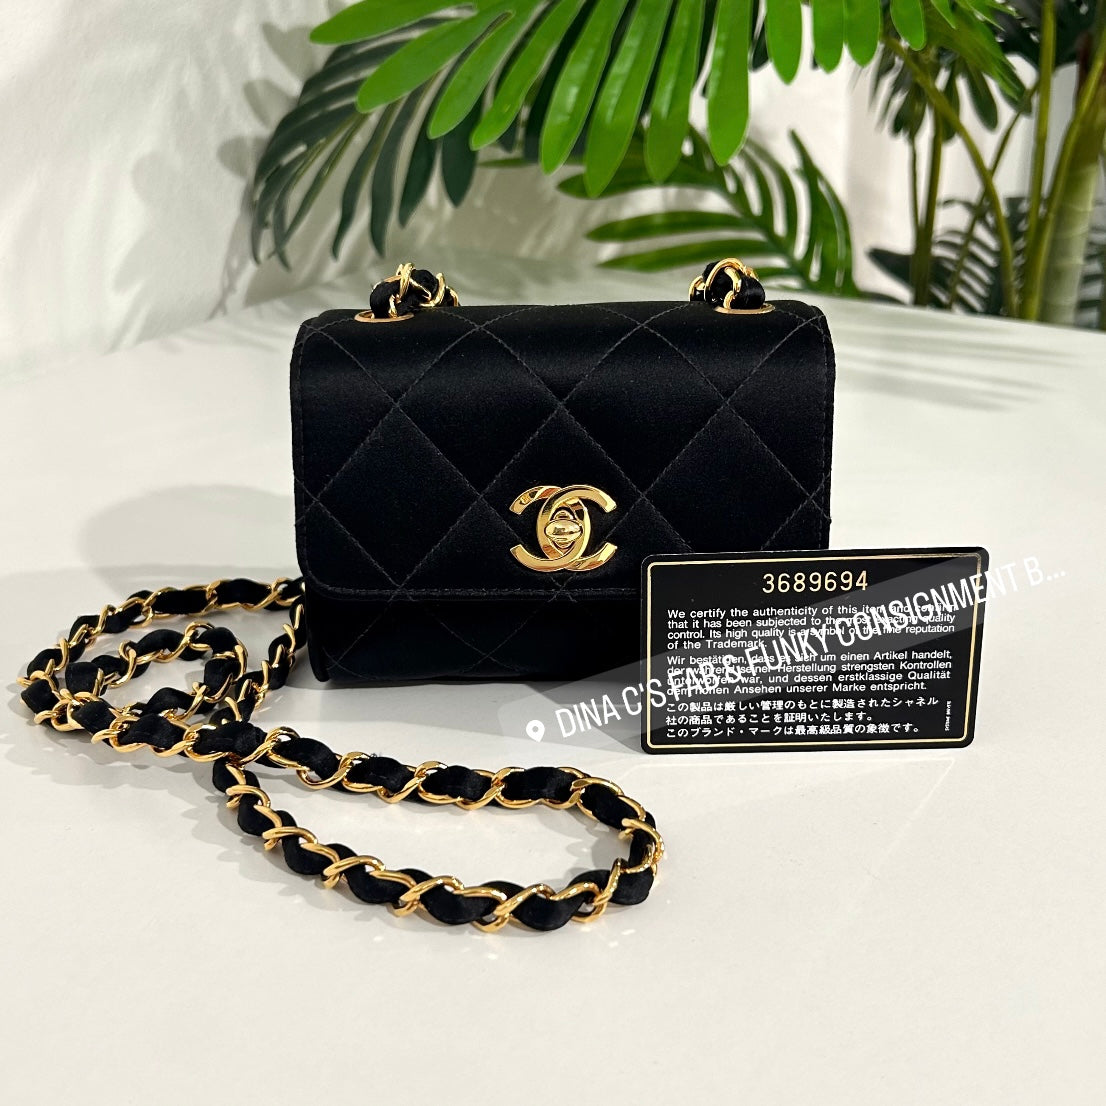 Chanel 4 Mini Bags - 52 For Sale on 1stDibs